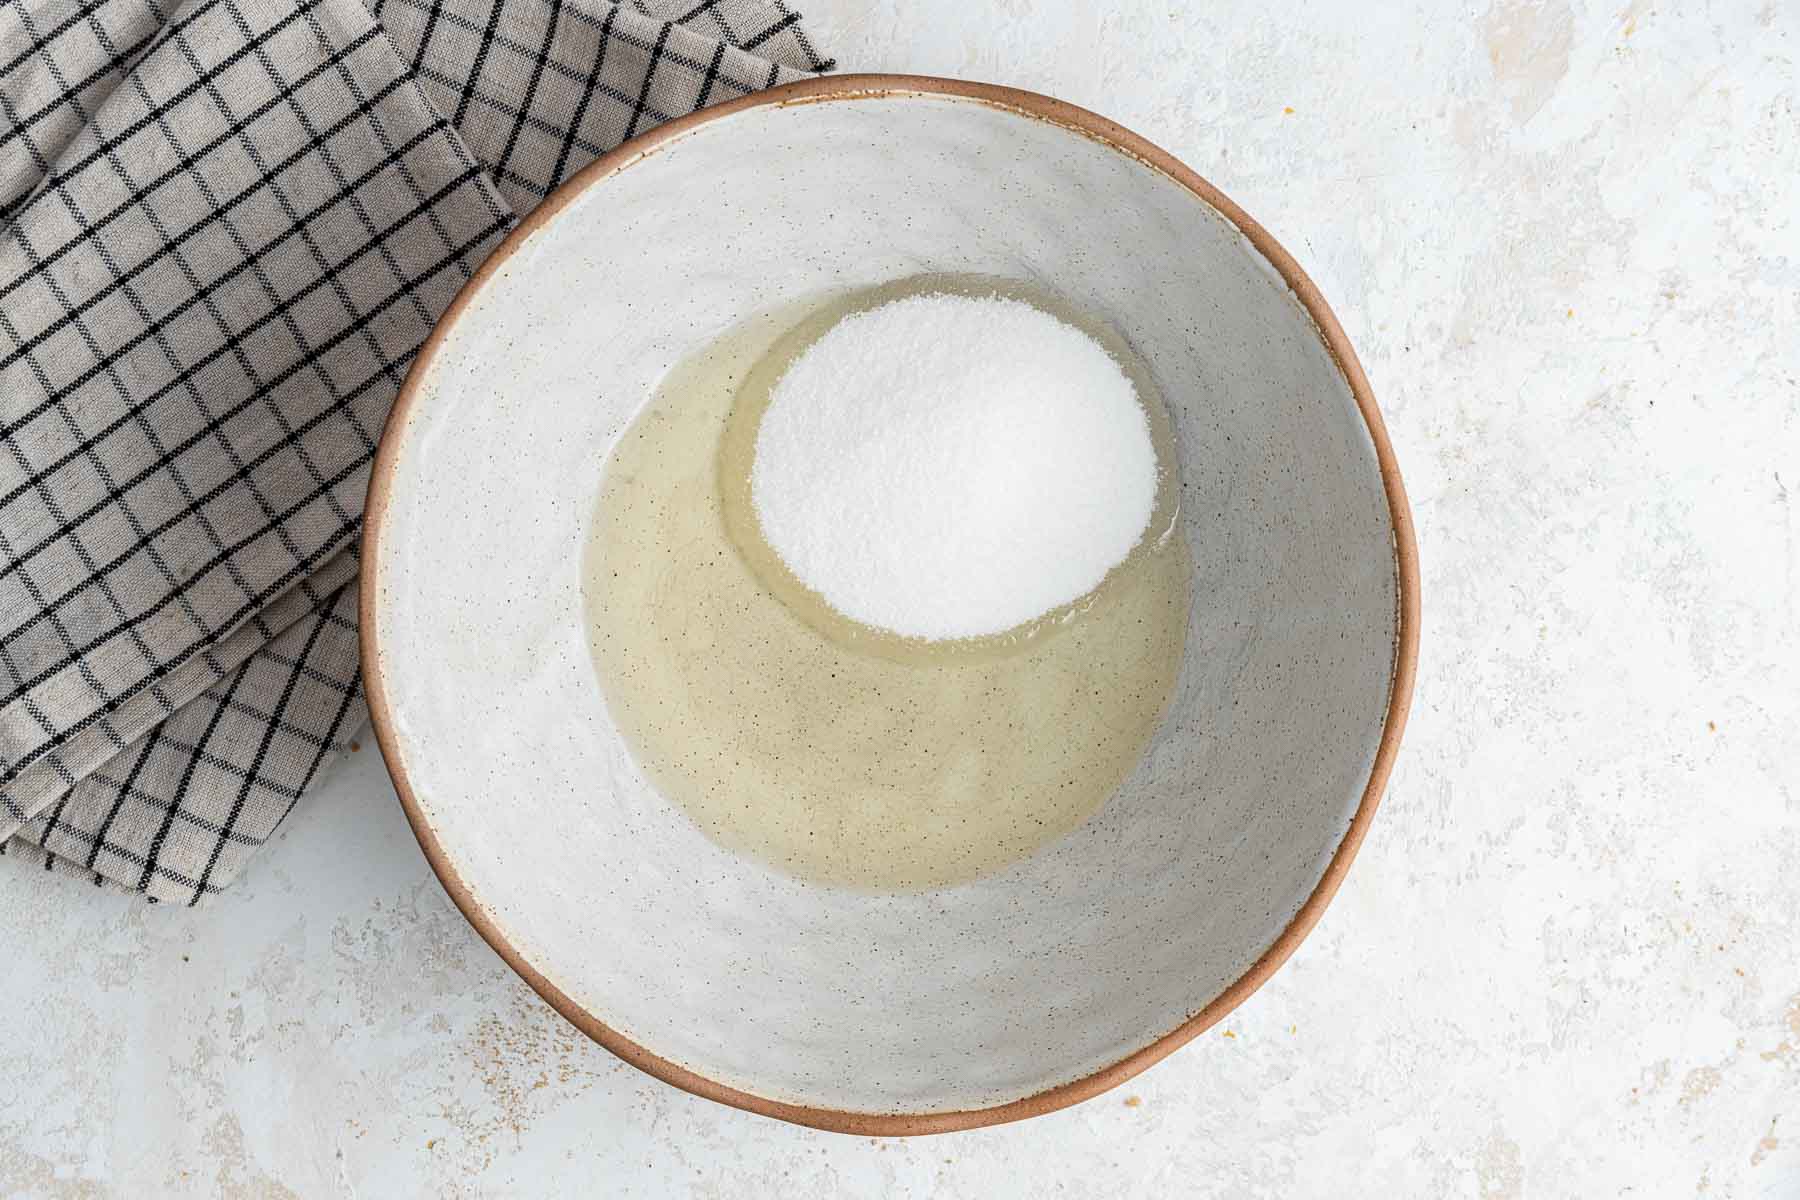 Oil and sugar in small bowl with kitchen towel on side.